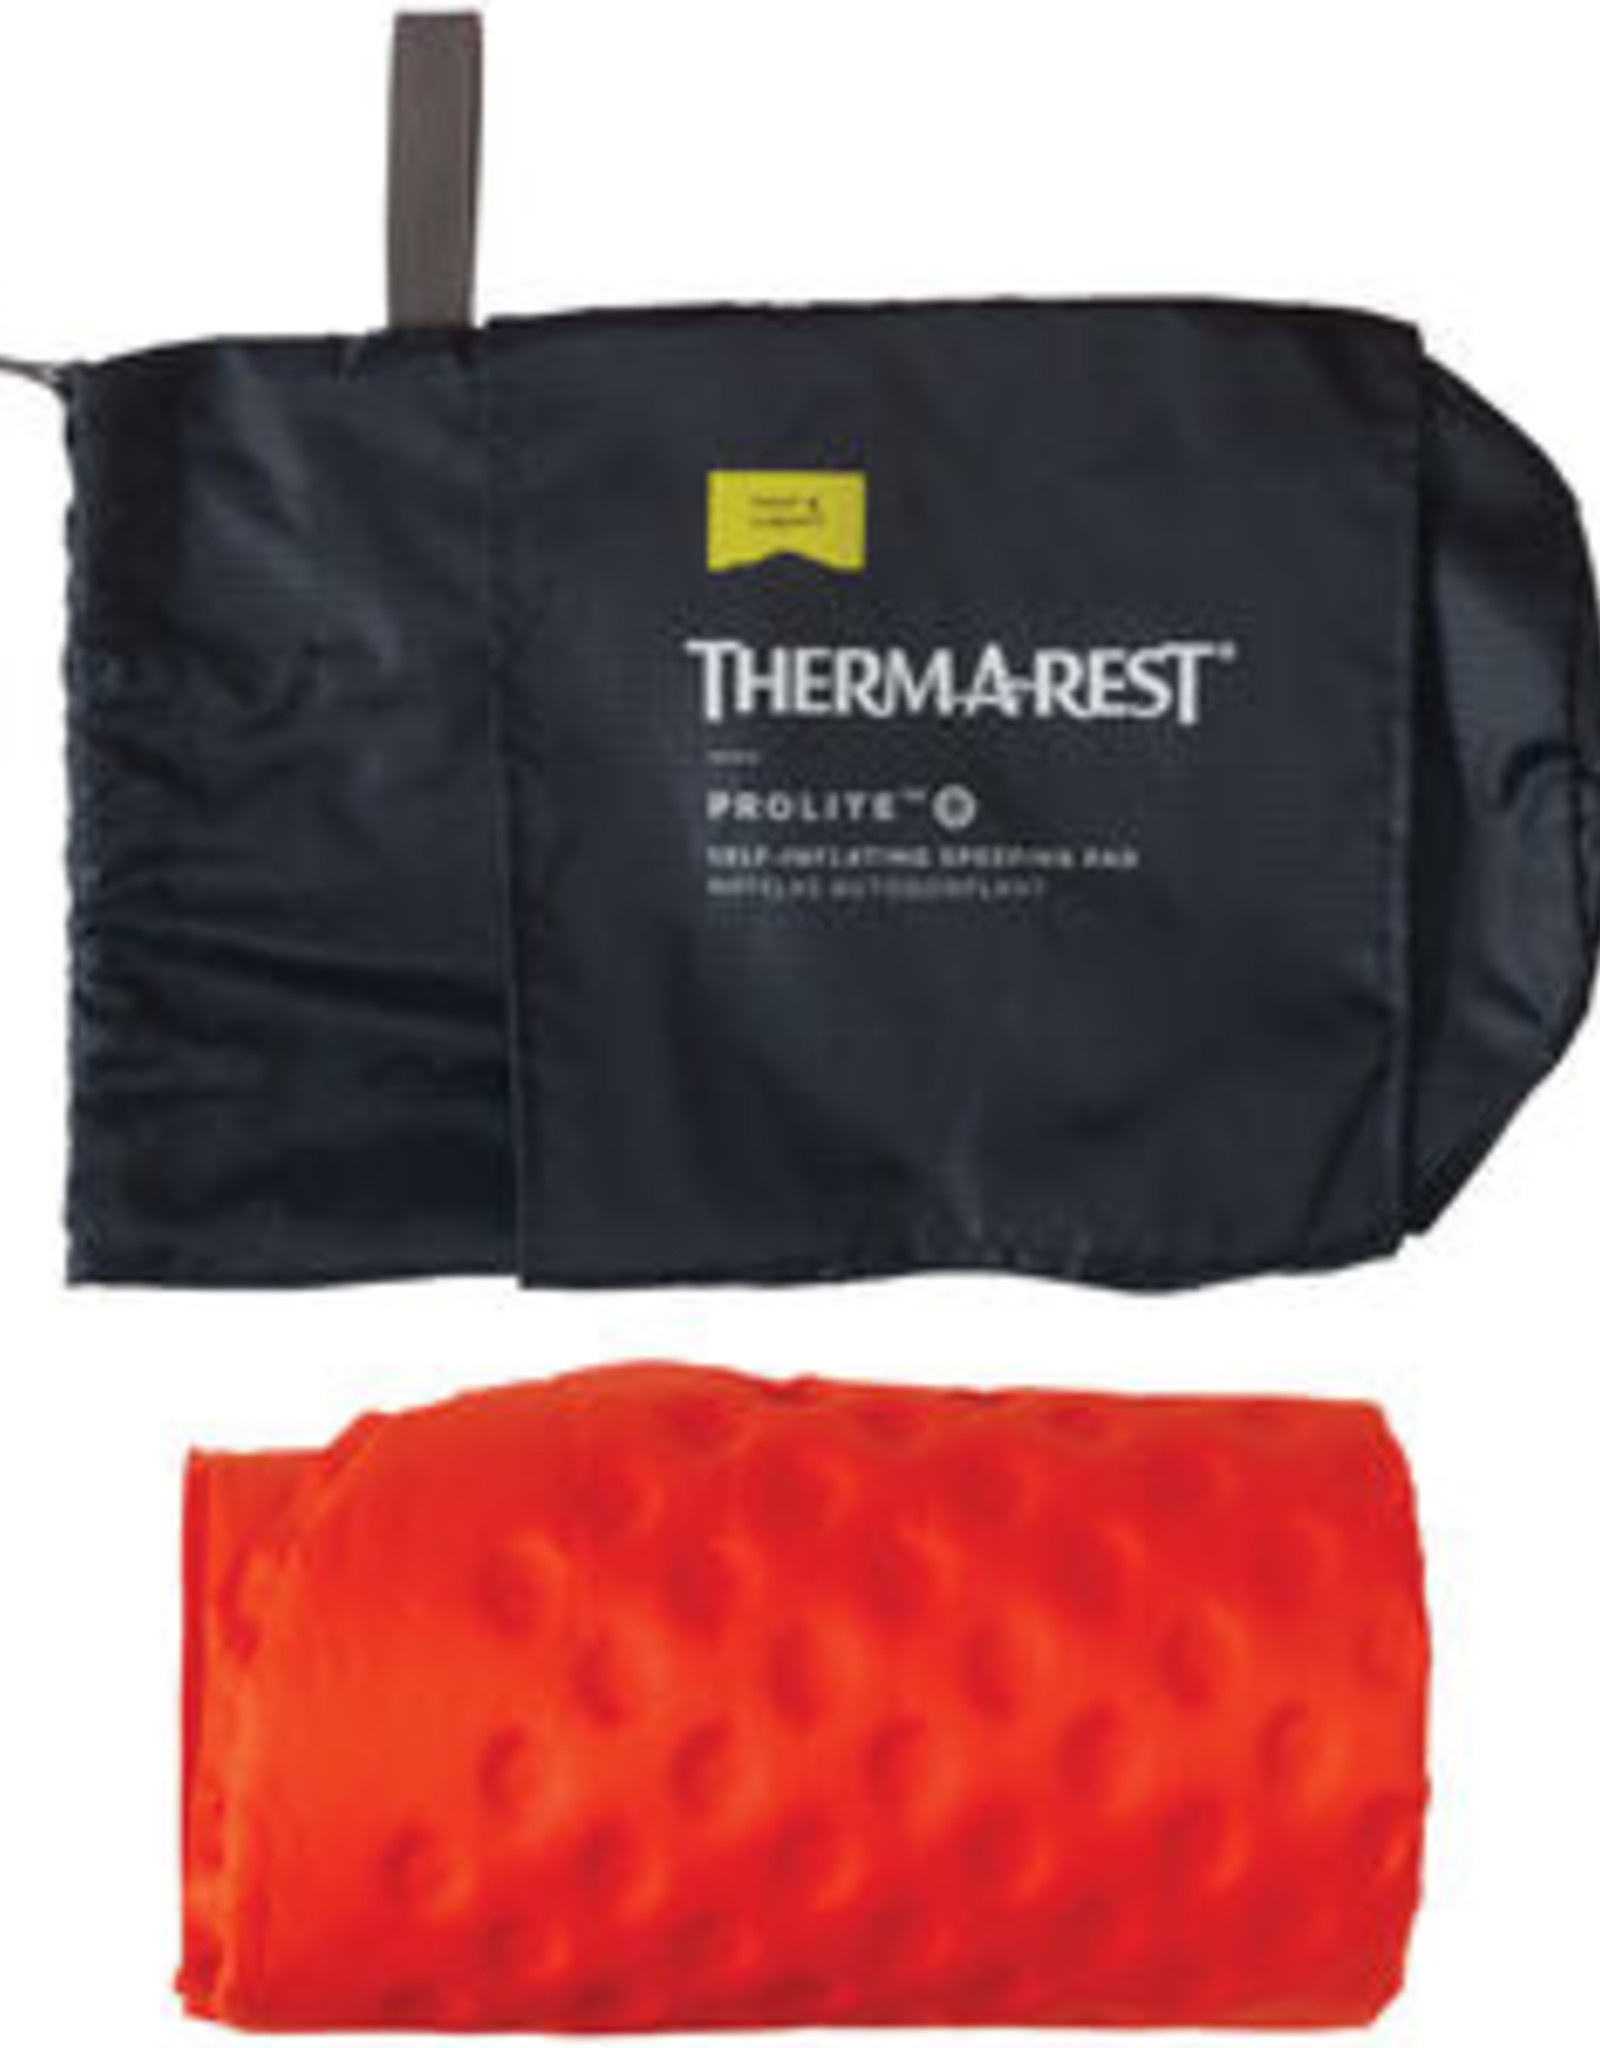 Therm-a-Rest Therm-a-rest ProLite Sleeping Pad Poppy Long